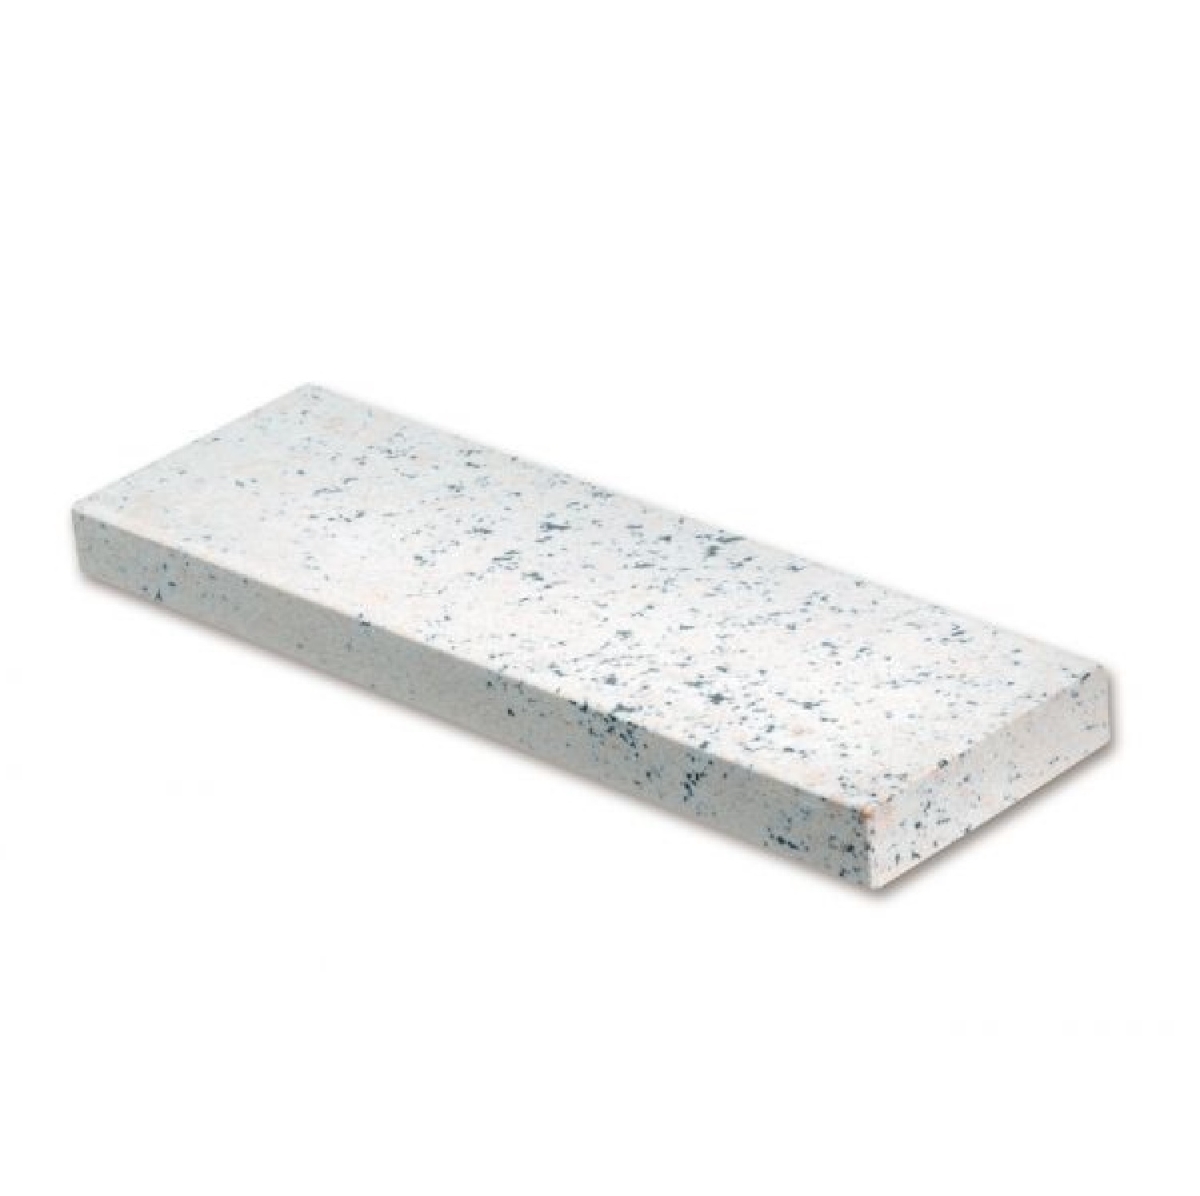 4017081 6 In. Soft Bench Stone With 400 600 Grit